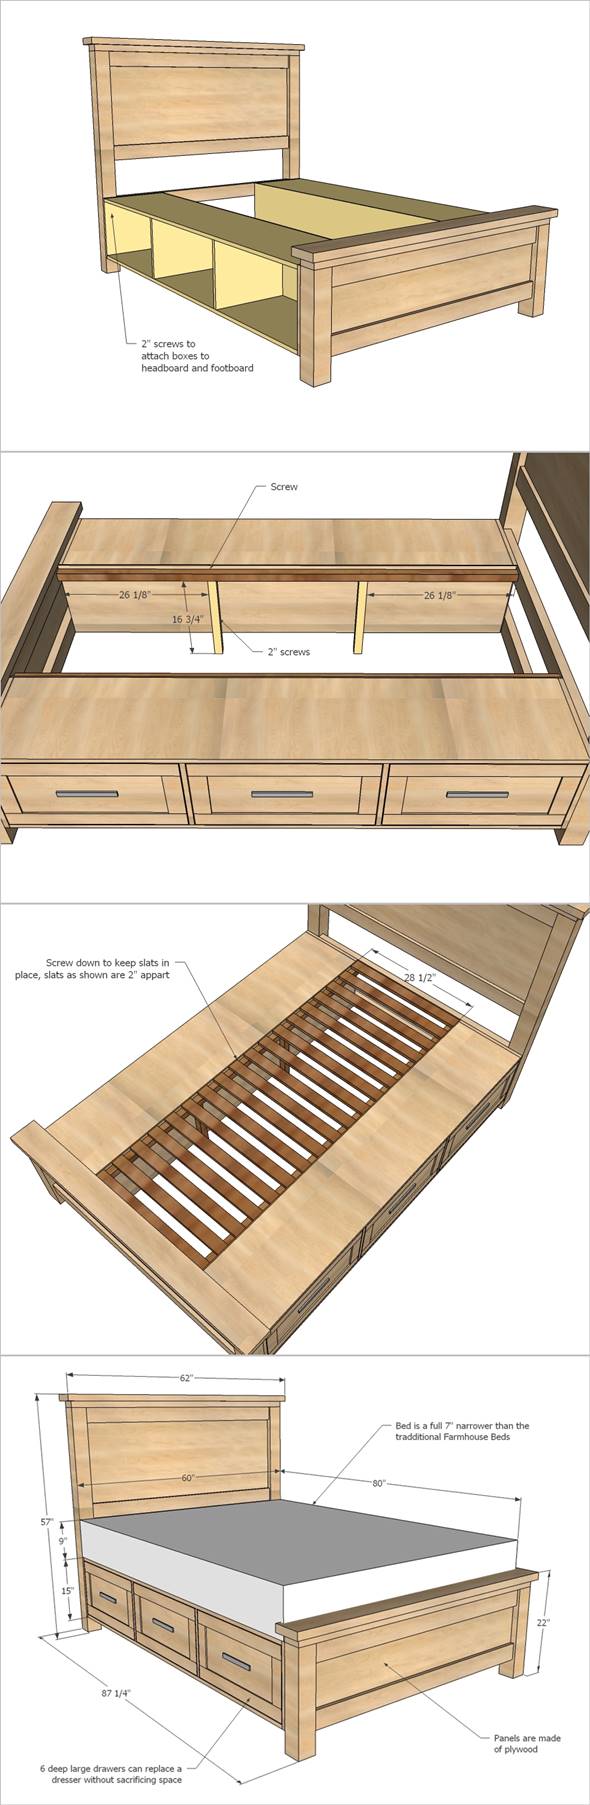 Creative Ideas - How To Build A Farmhouse Storage Bed with Drawers